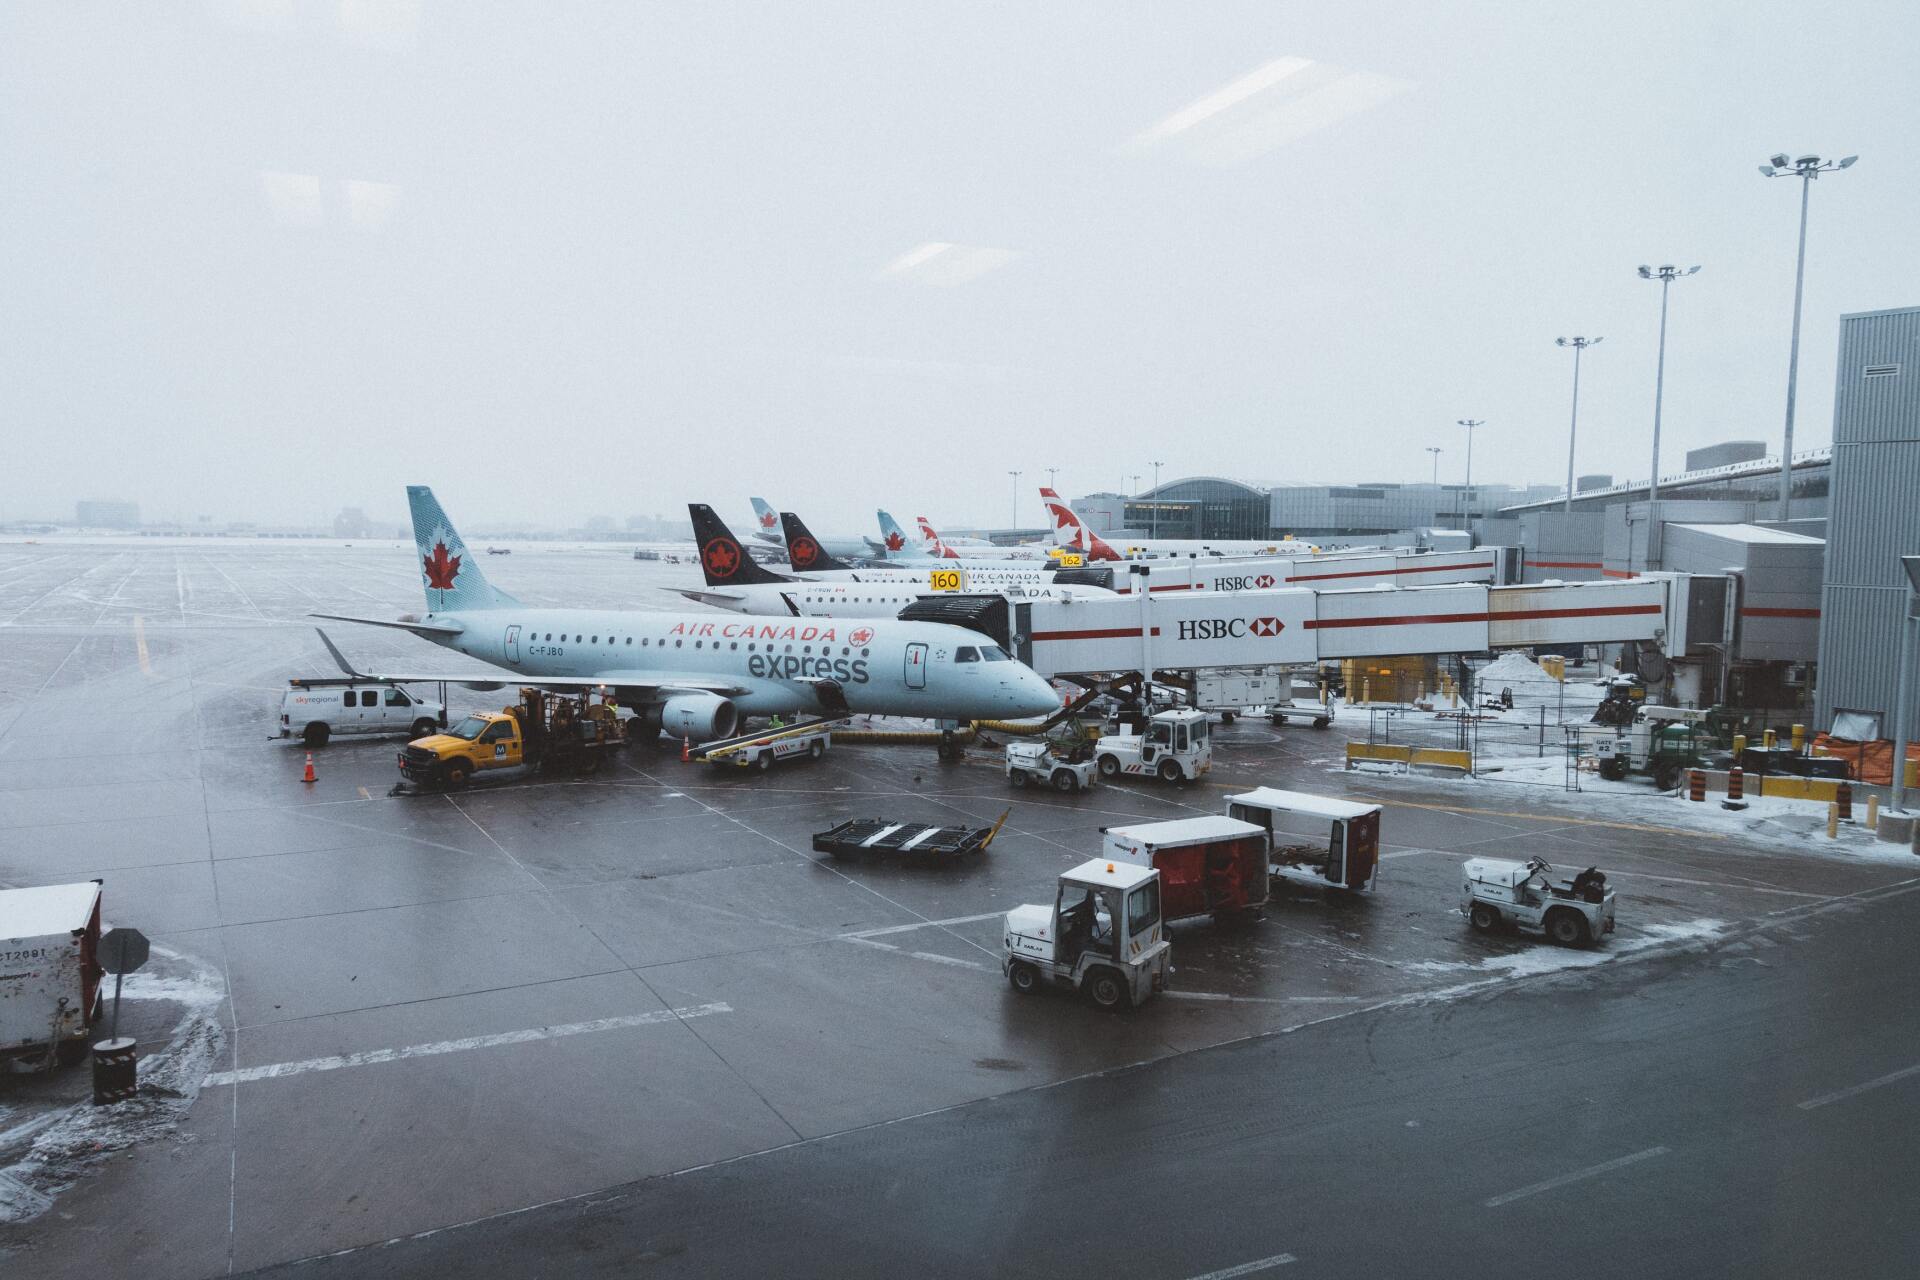 Airplanes at the boarding area